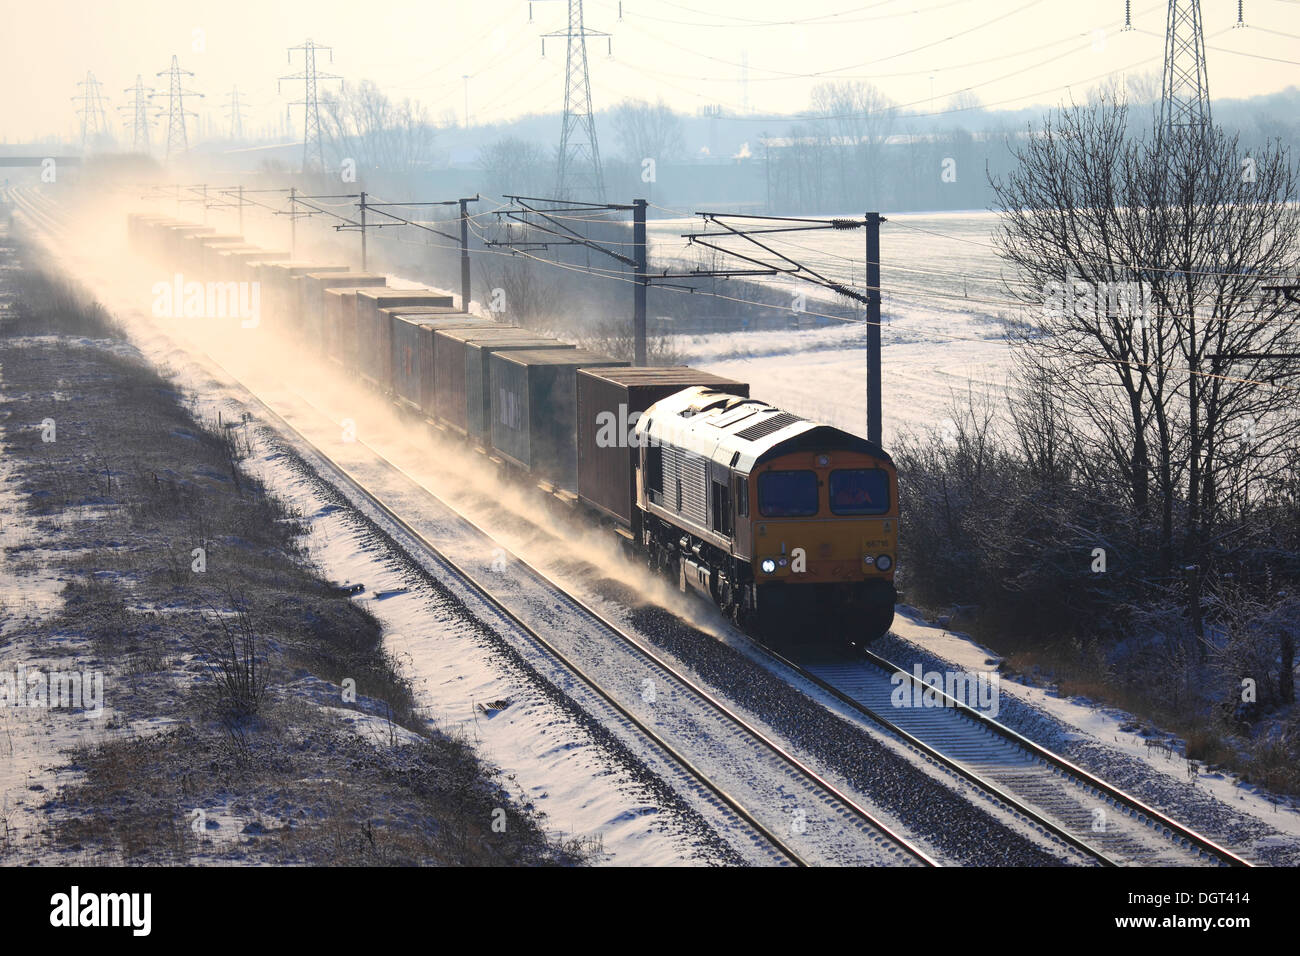 Winter Snow, GBFR Trains 66716 Diesel Freight Train, pulling containers, East Coast Main Line Railway, Cambridgeshire, England Stock Photo